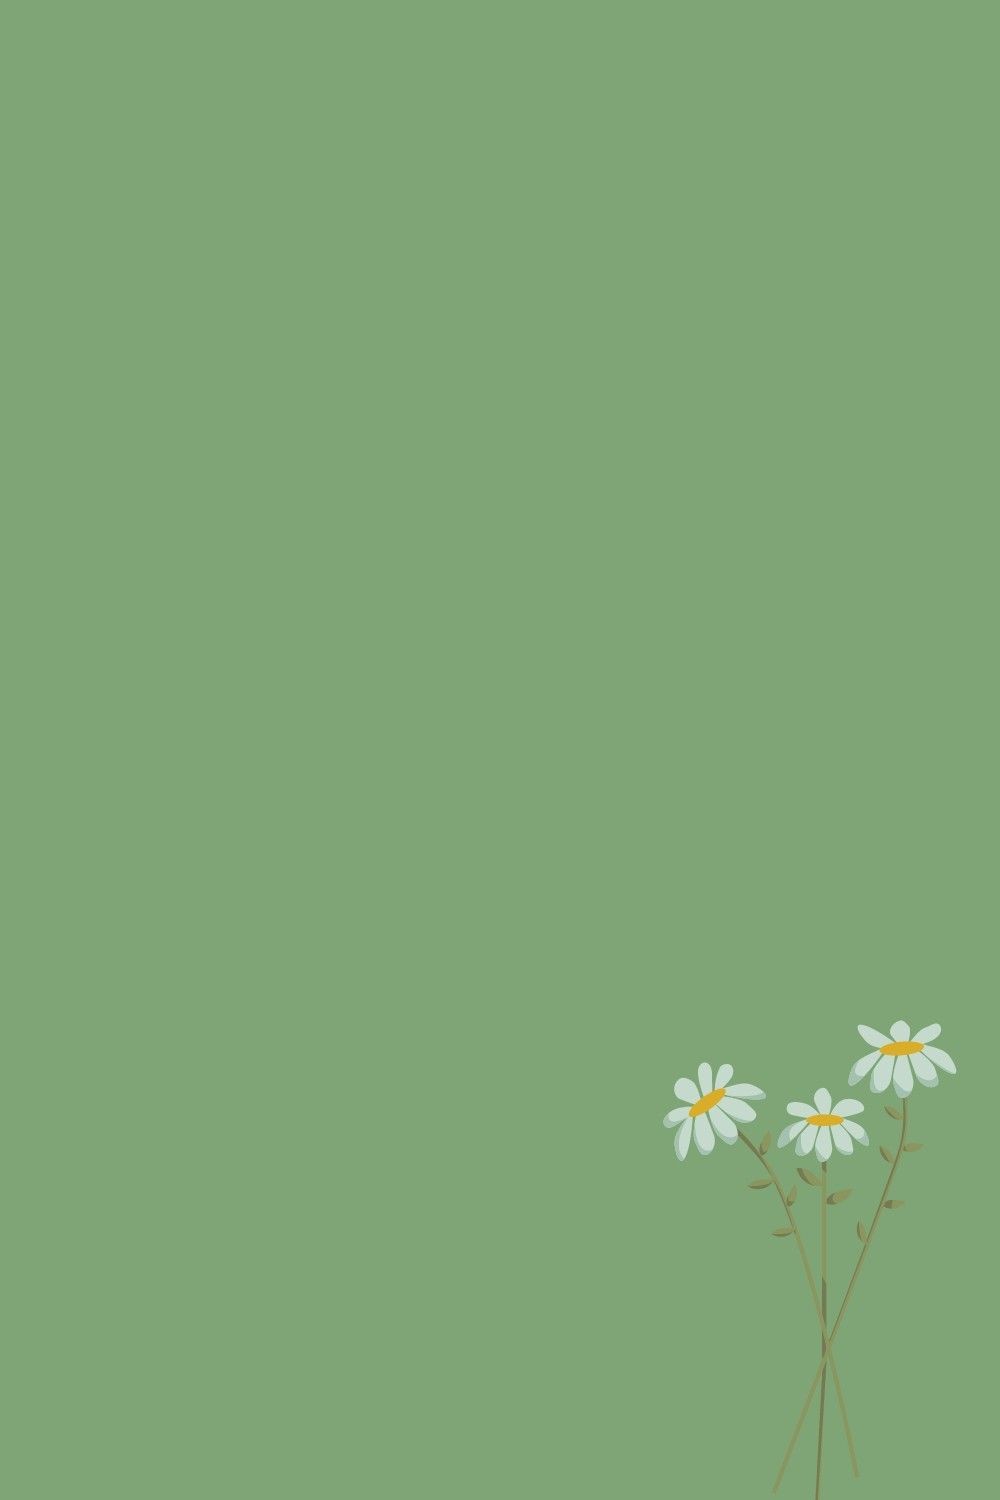 IPhone wallpaper with a green background and white flowers - Sage green